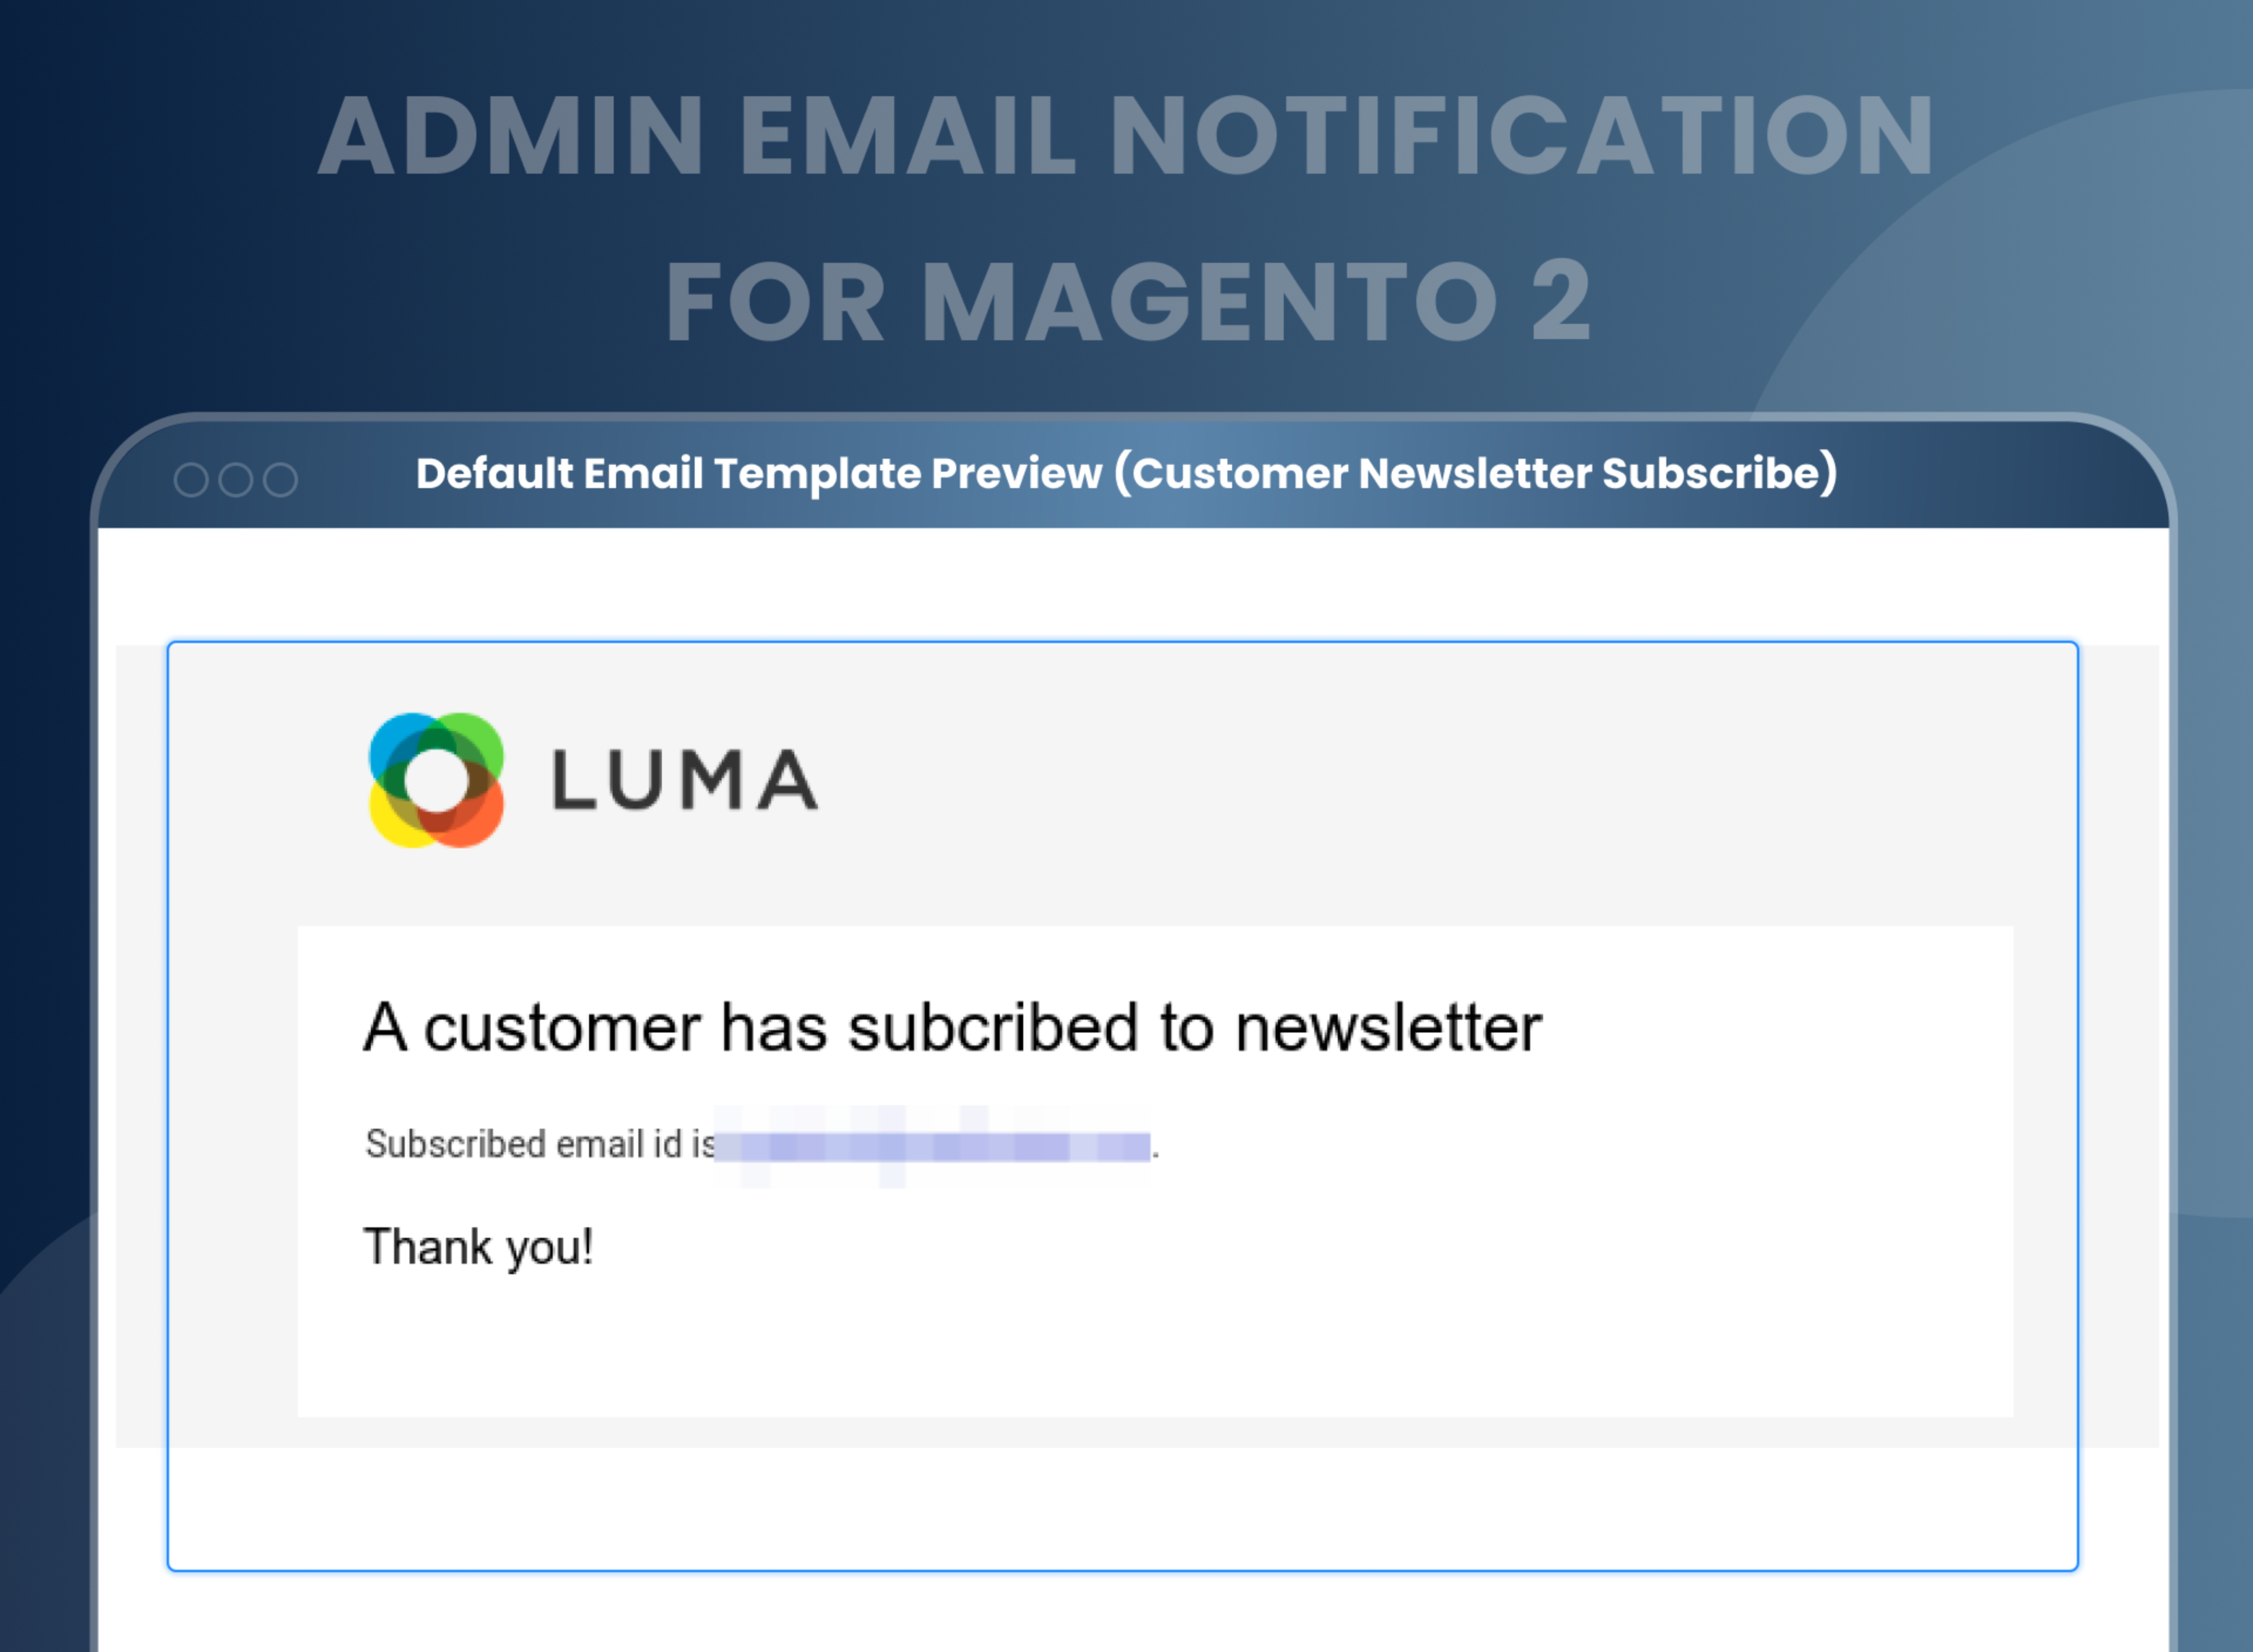  Default Email Template Preview (Customer Newsletter Subscribe)